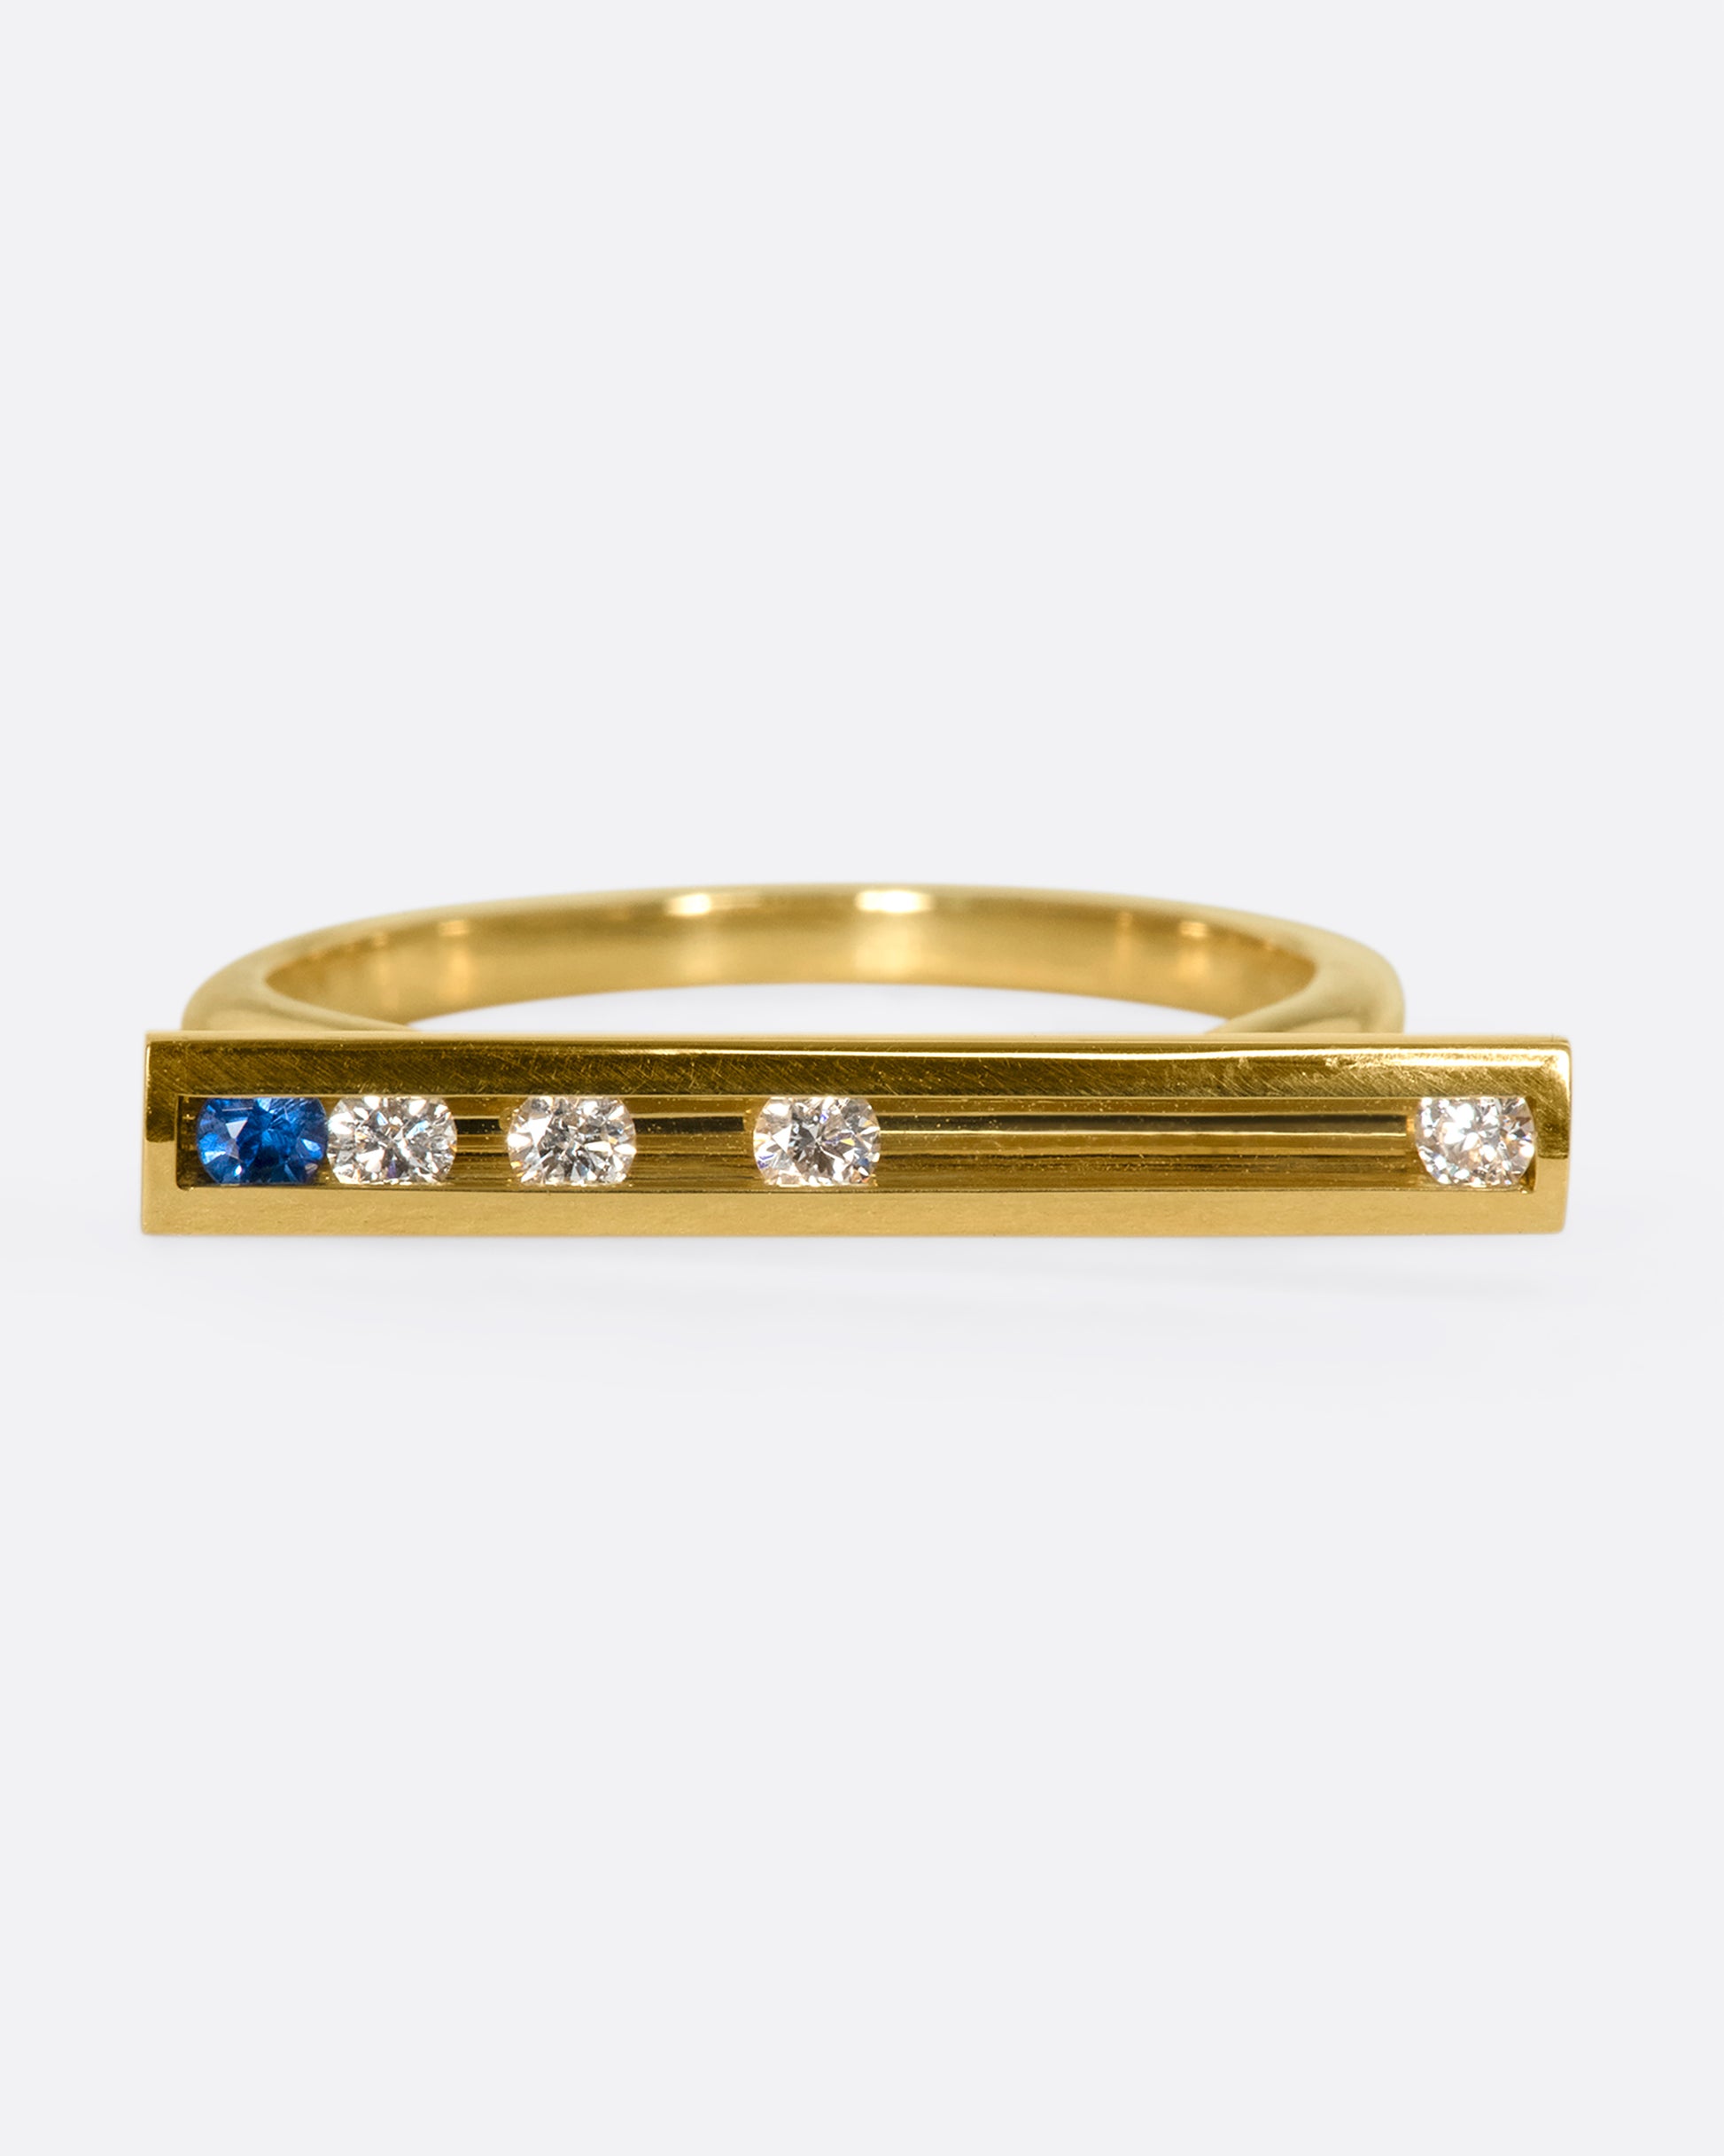 A flat-face ring with blue sapphires and diamonds that glide across an 18K gold bar.